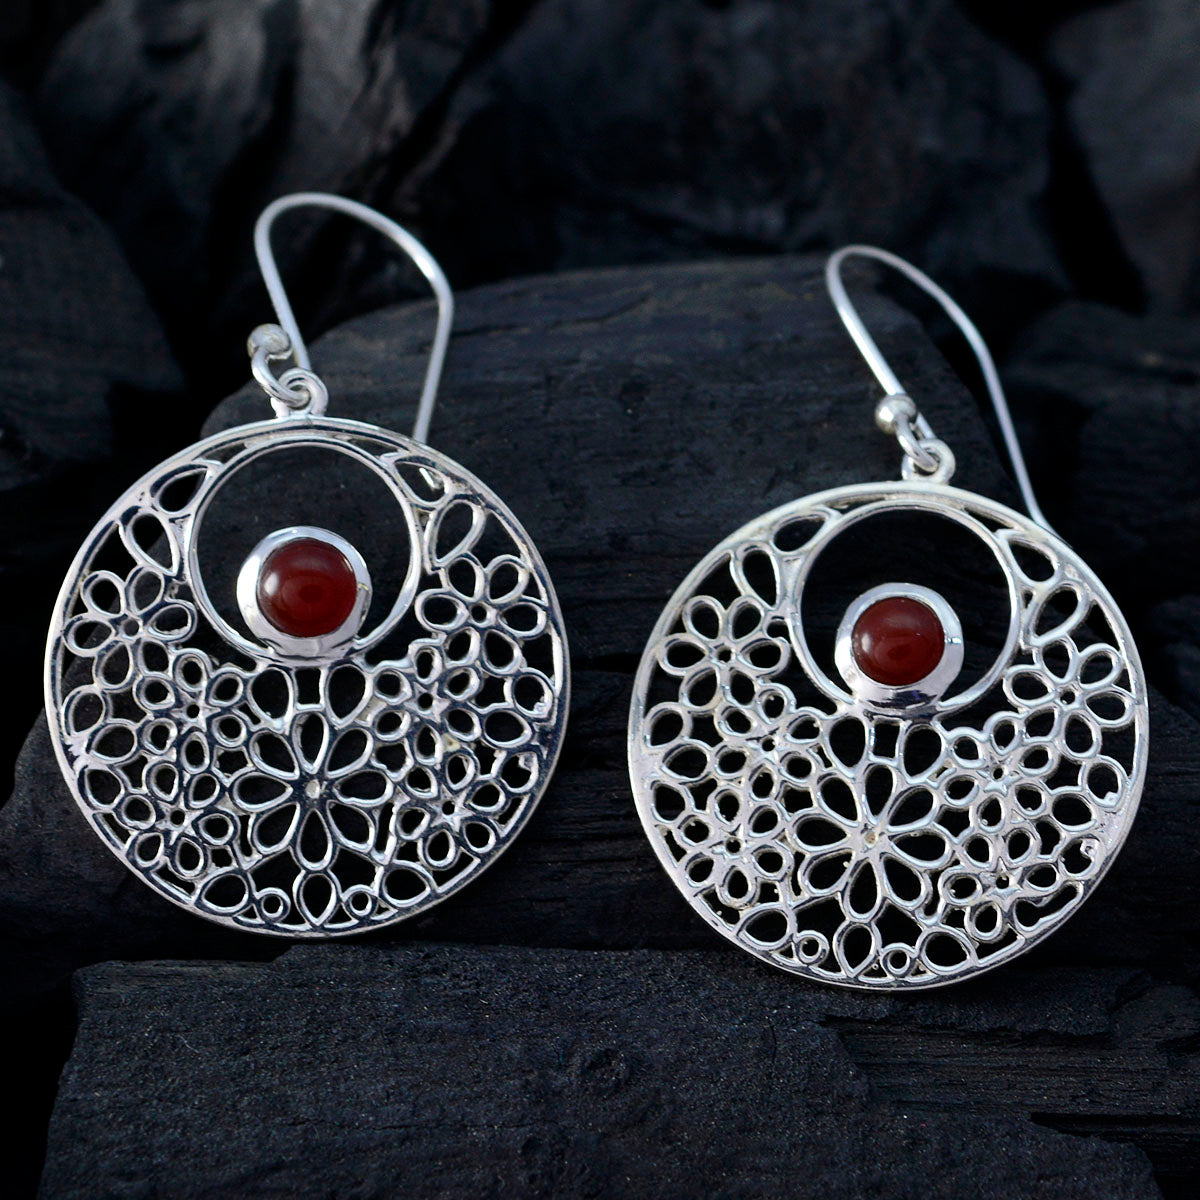 Riyo Nice Gemstone round Cabochon Red Onyx Silver Earring gift fordaughter day